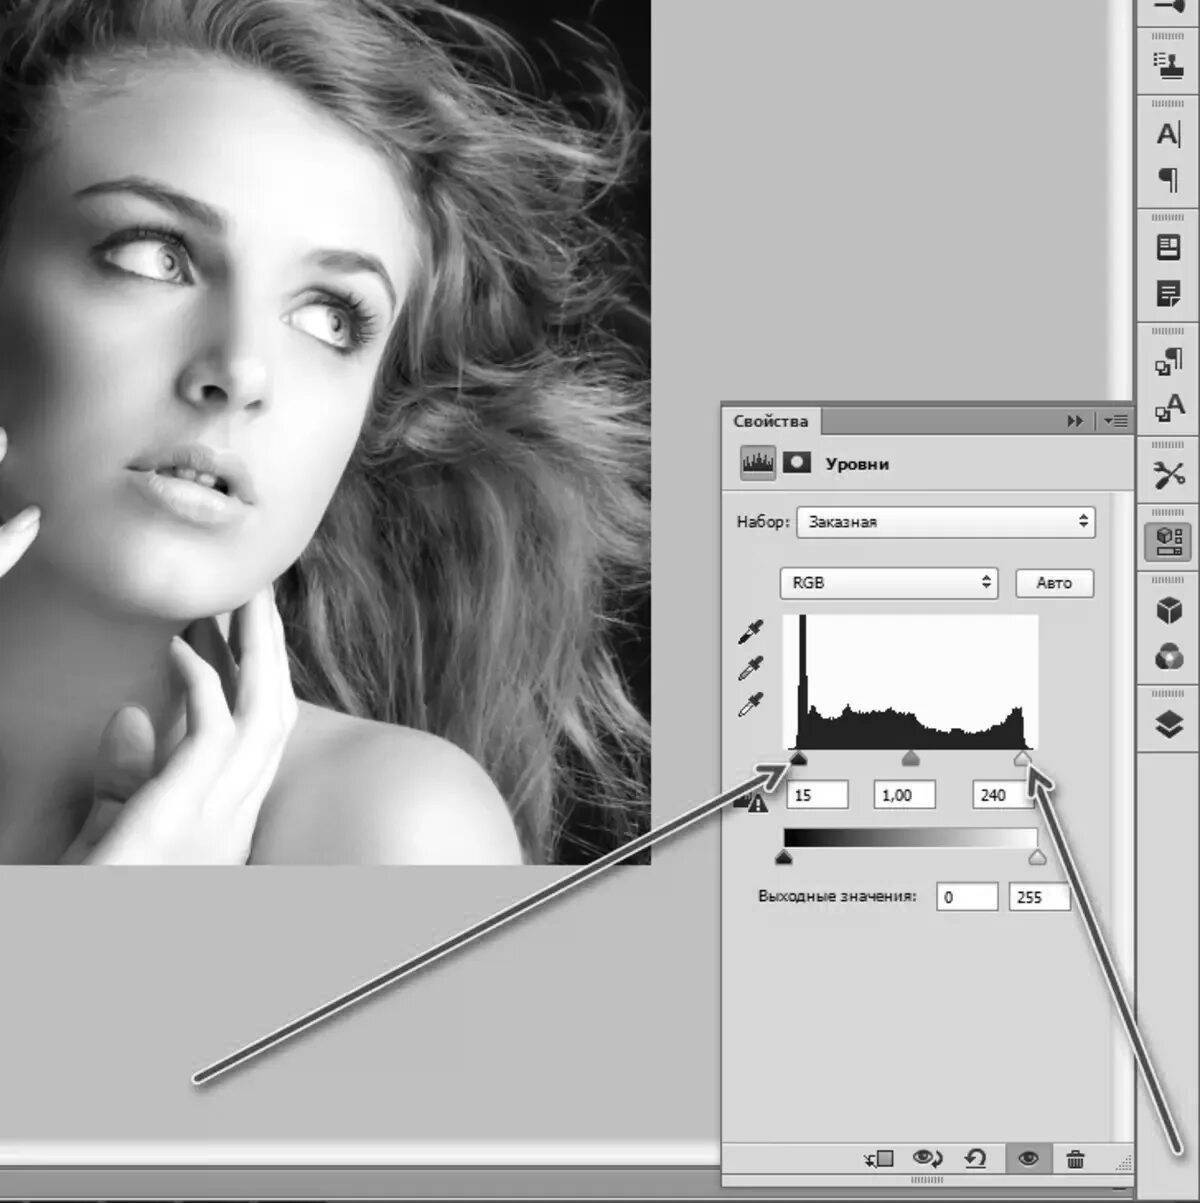 Brilliant program for colorizing black and white photography